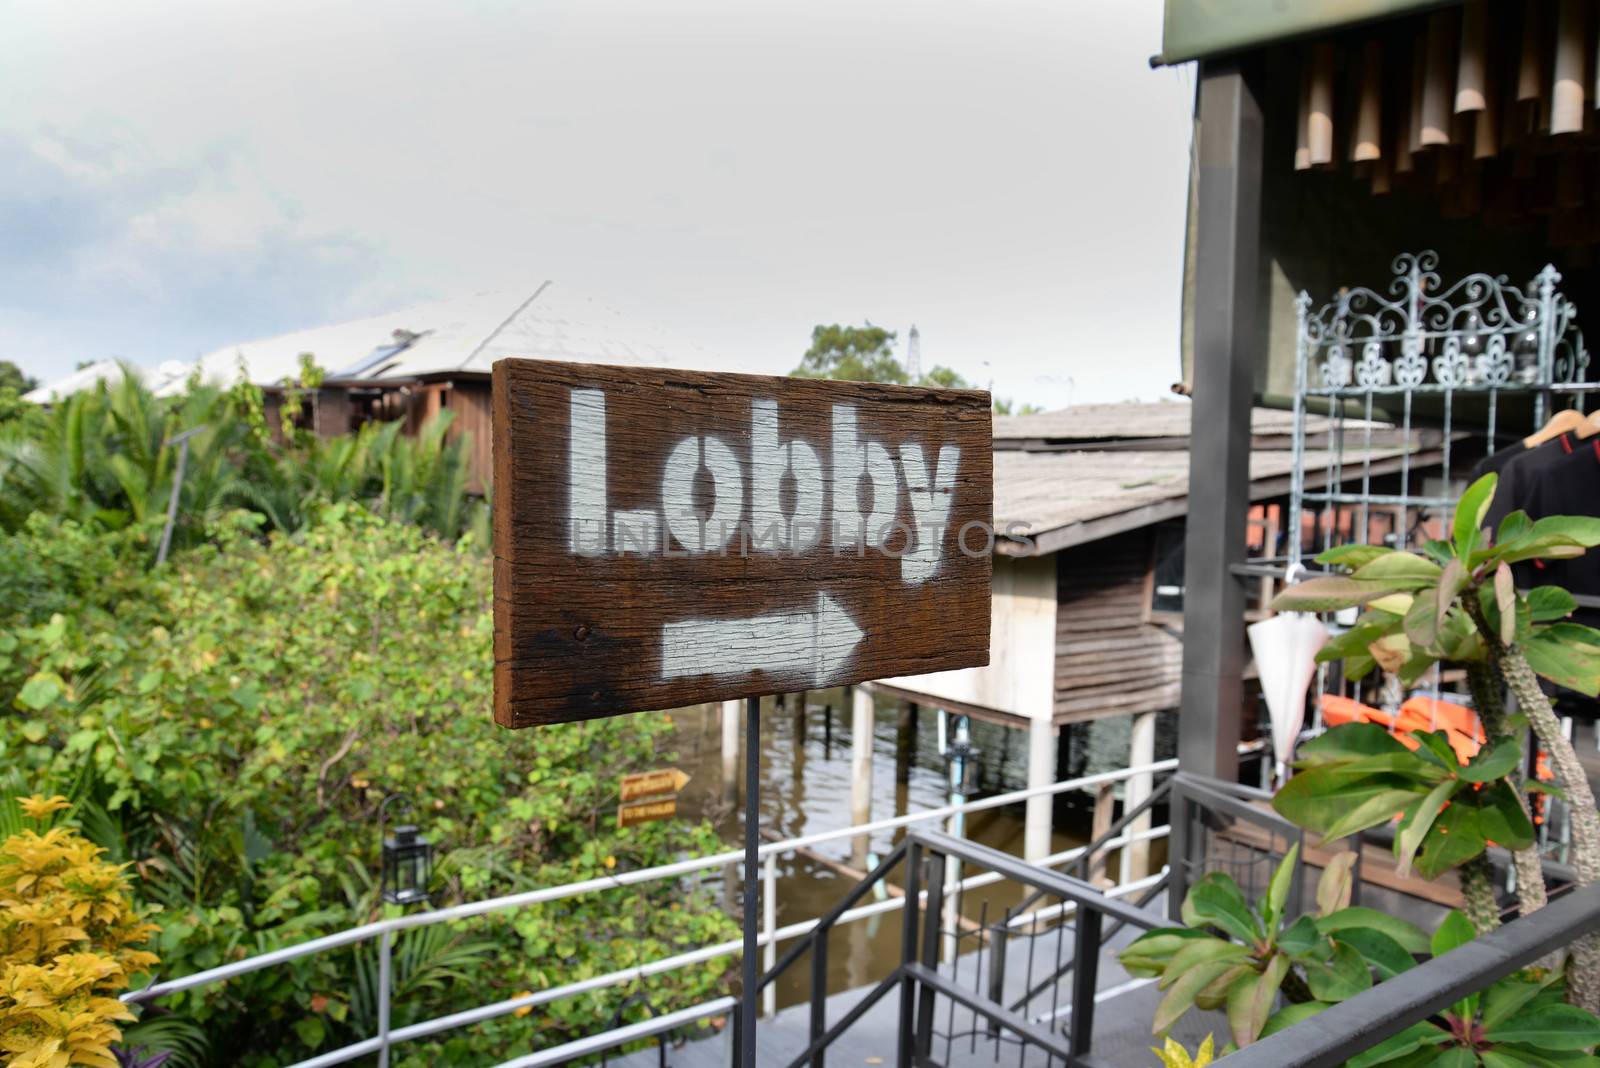 Wood signs to Lobby